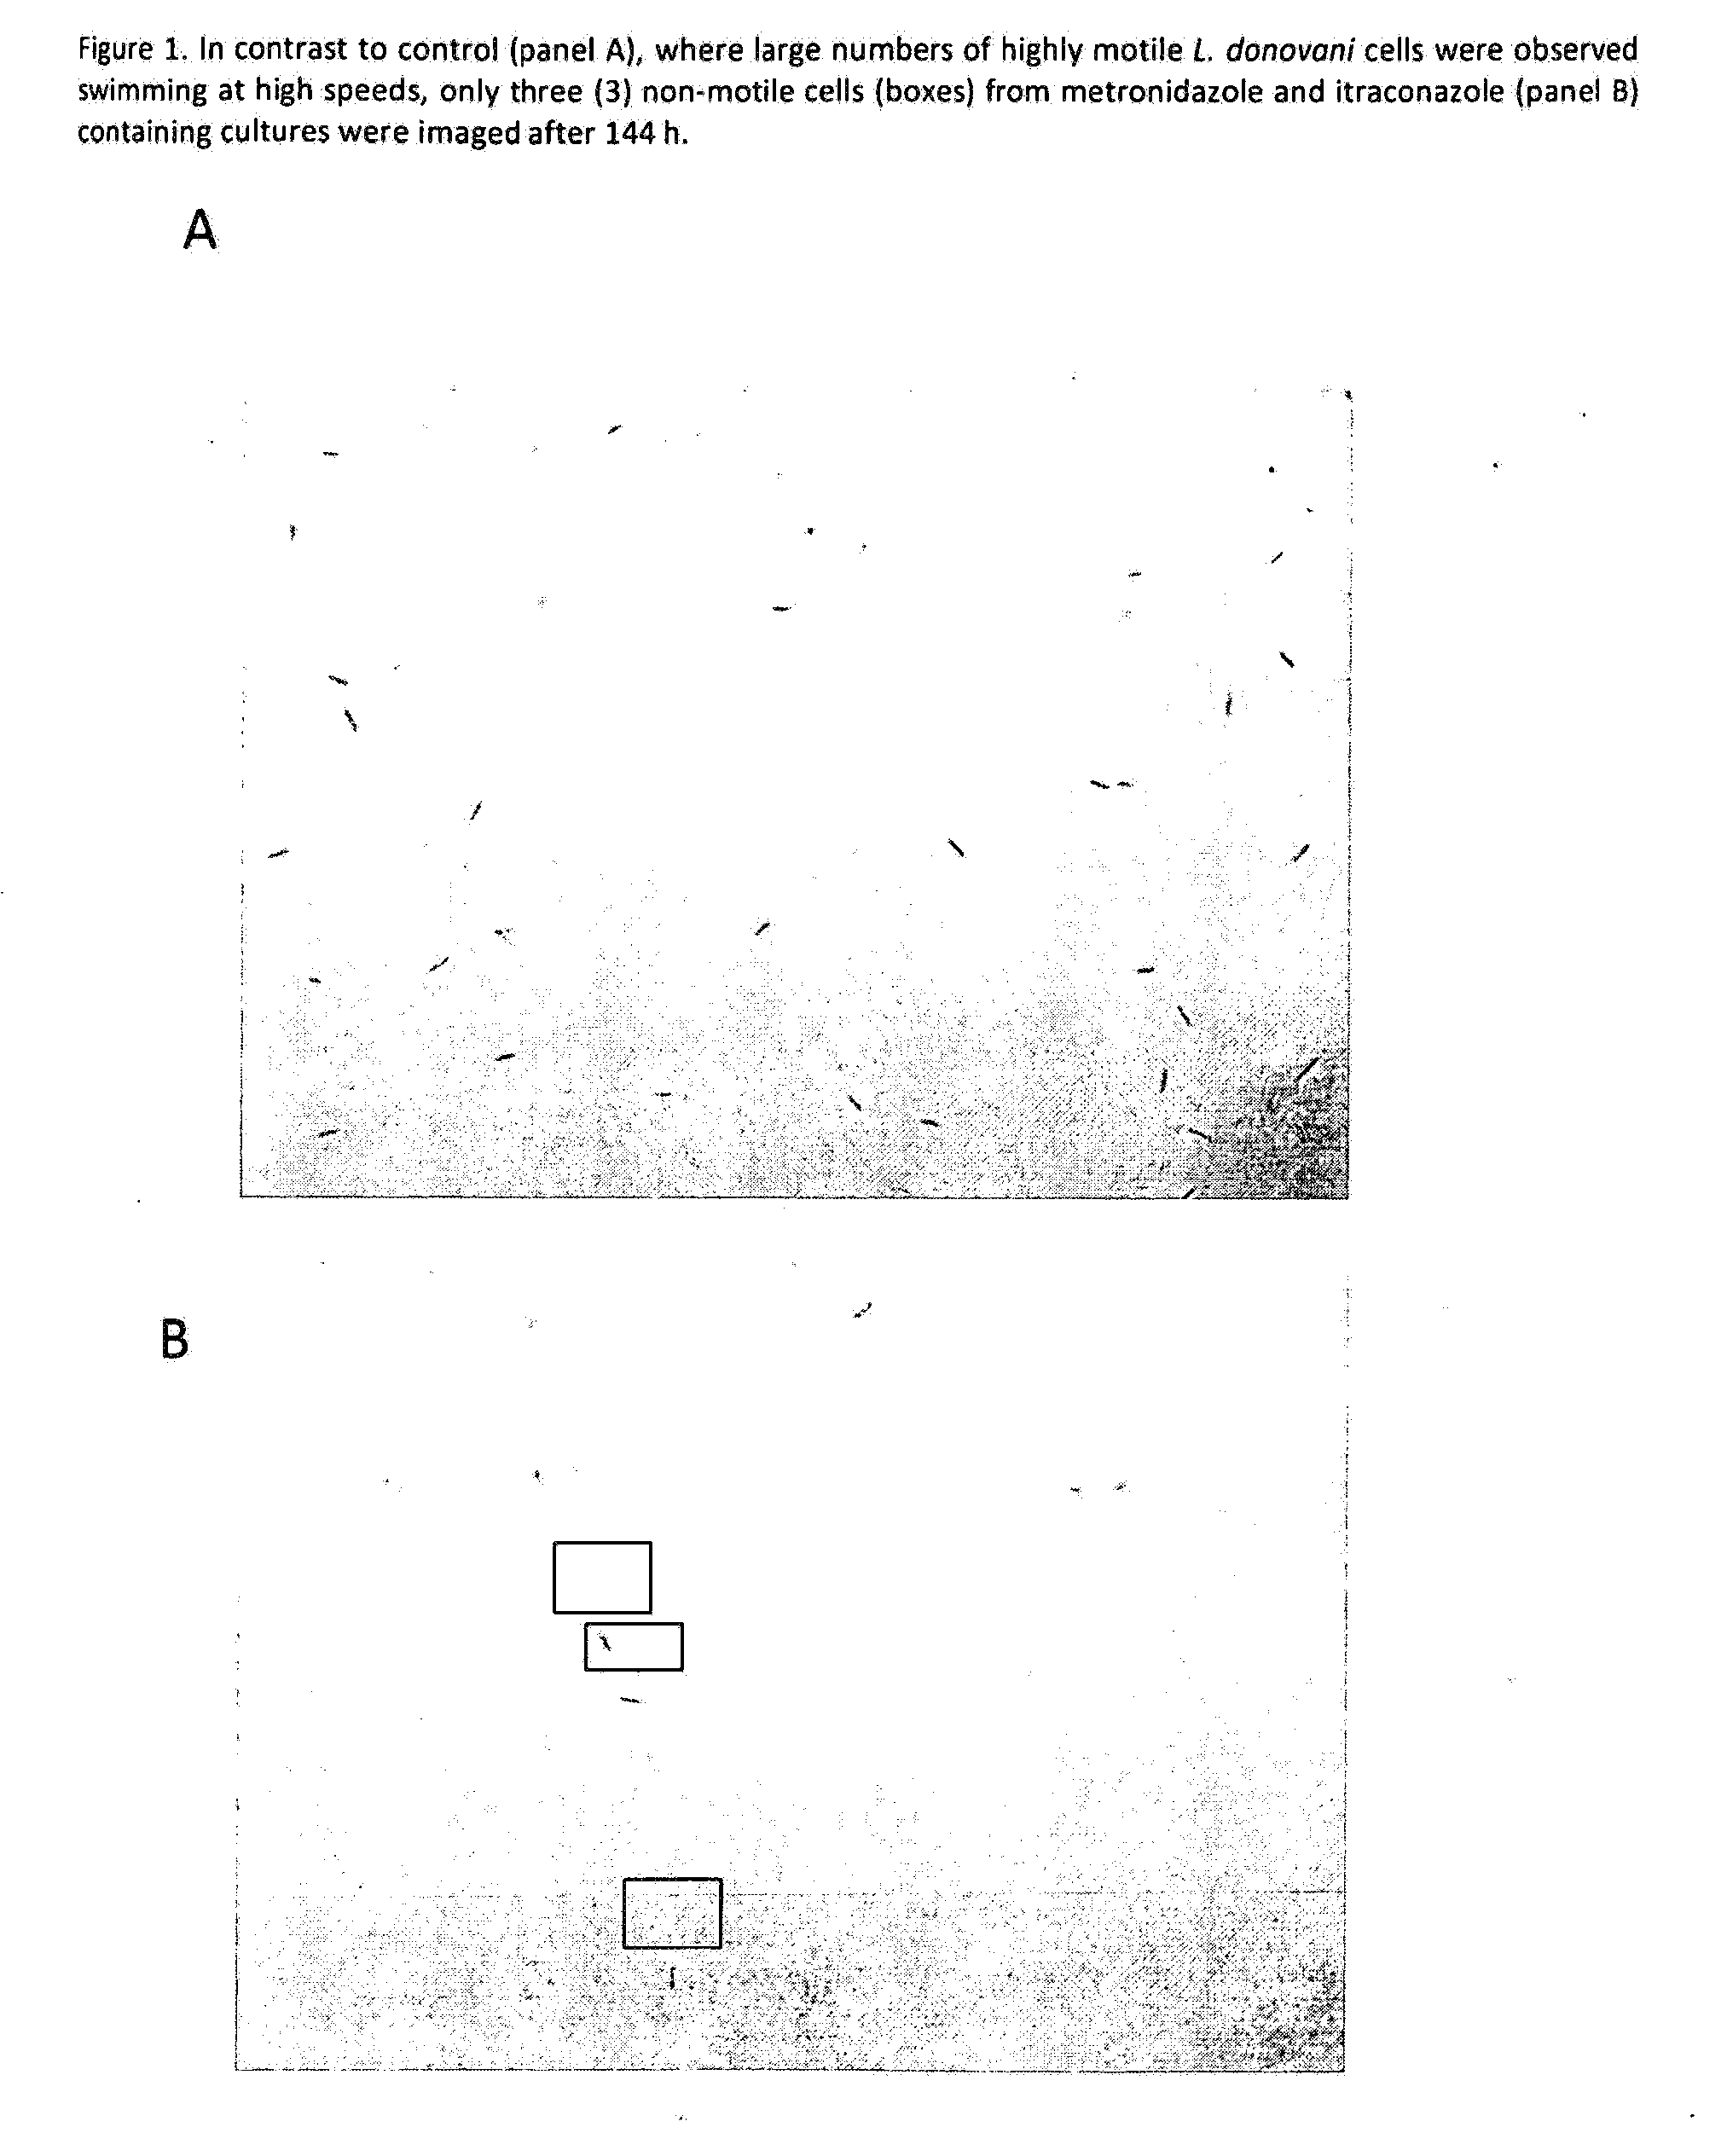 Method for treating a protozoal infection